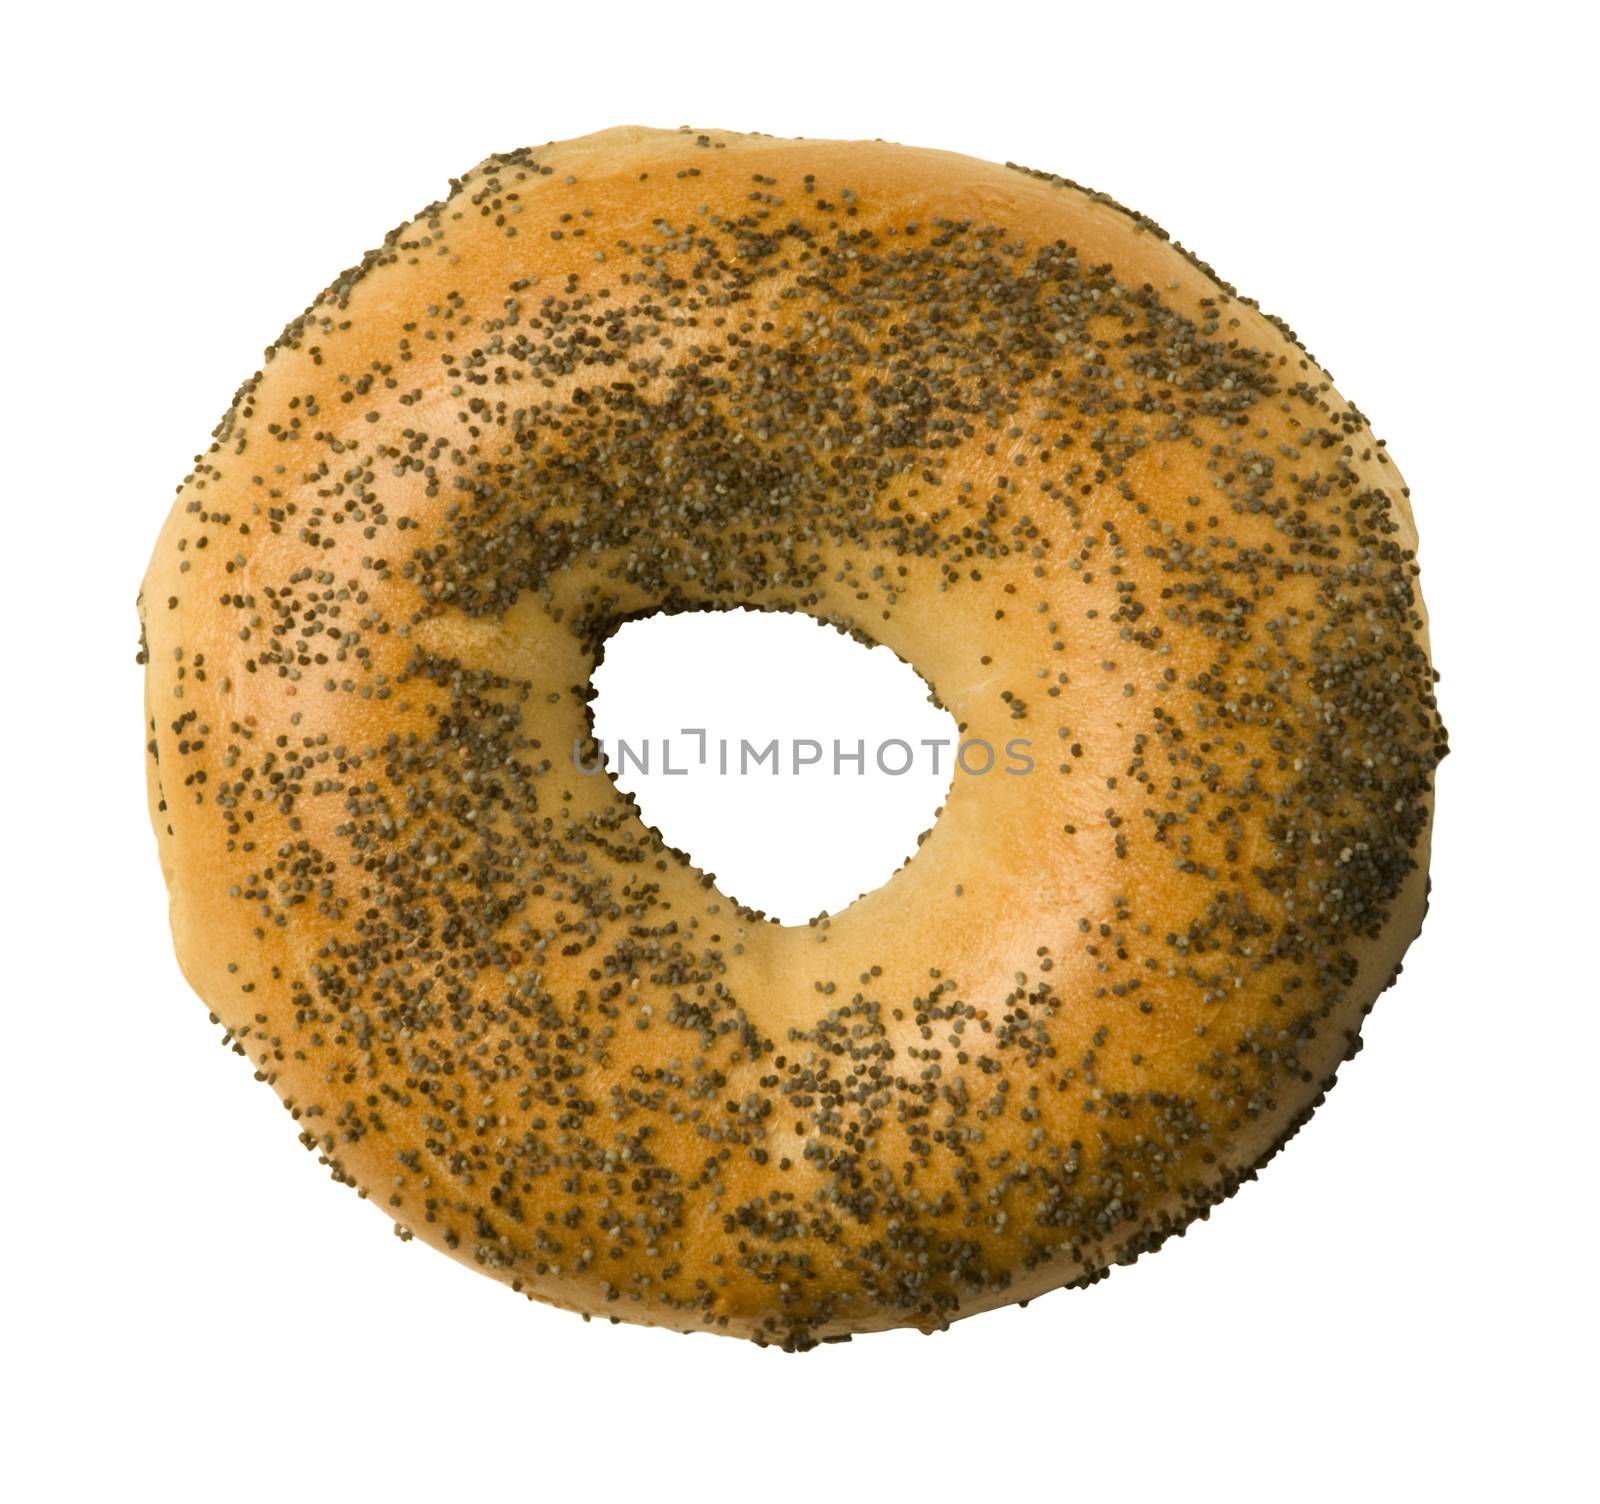 Poppy seed bagel isolated against a white background